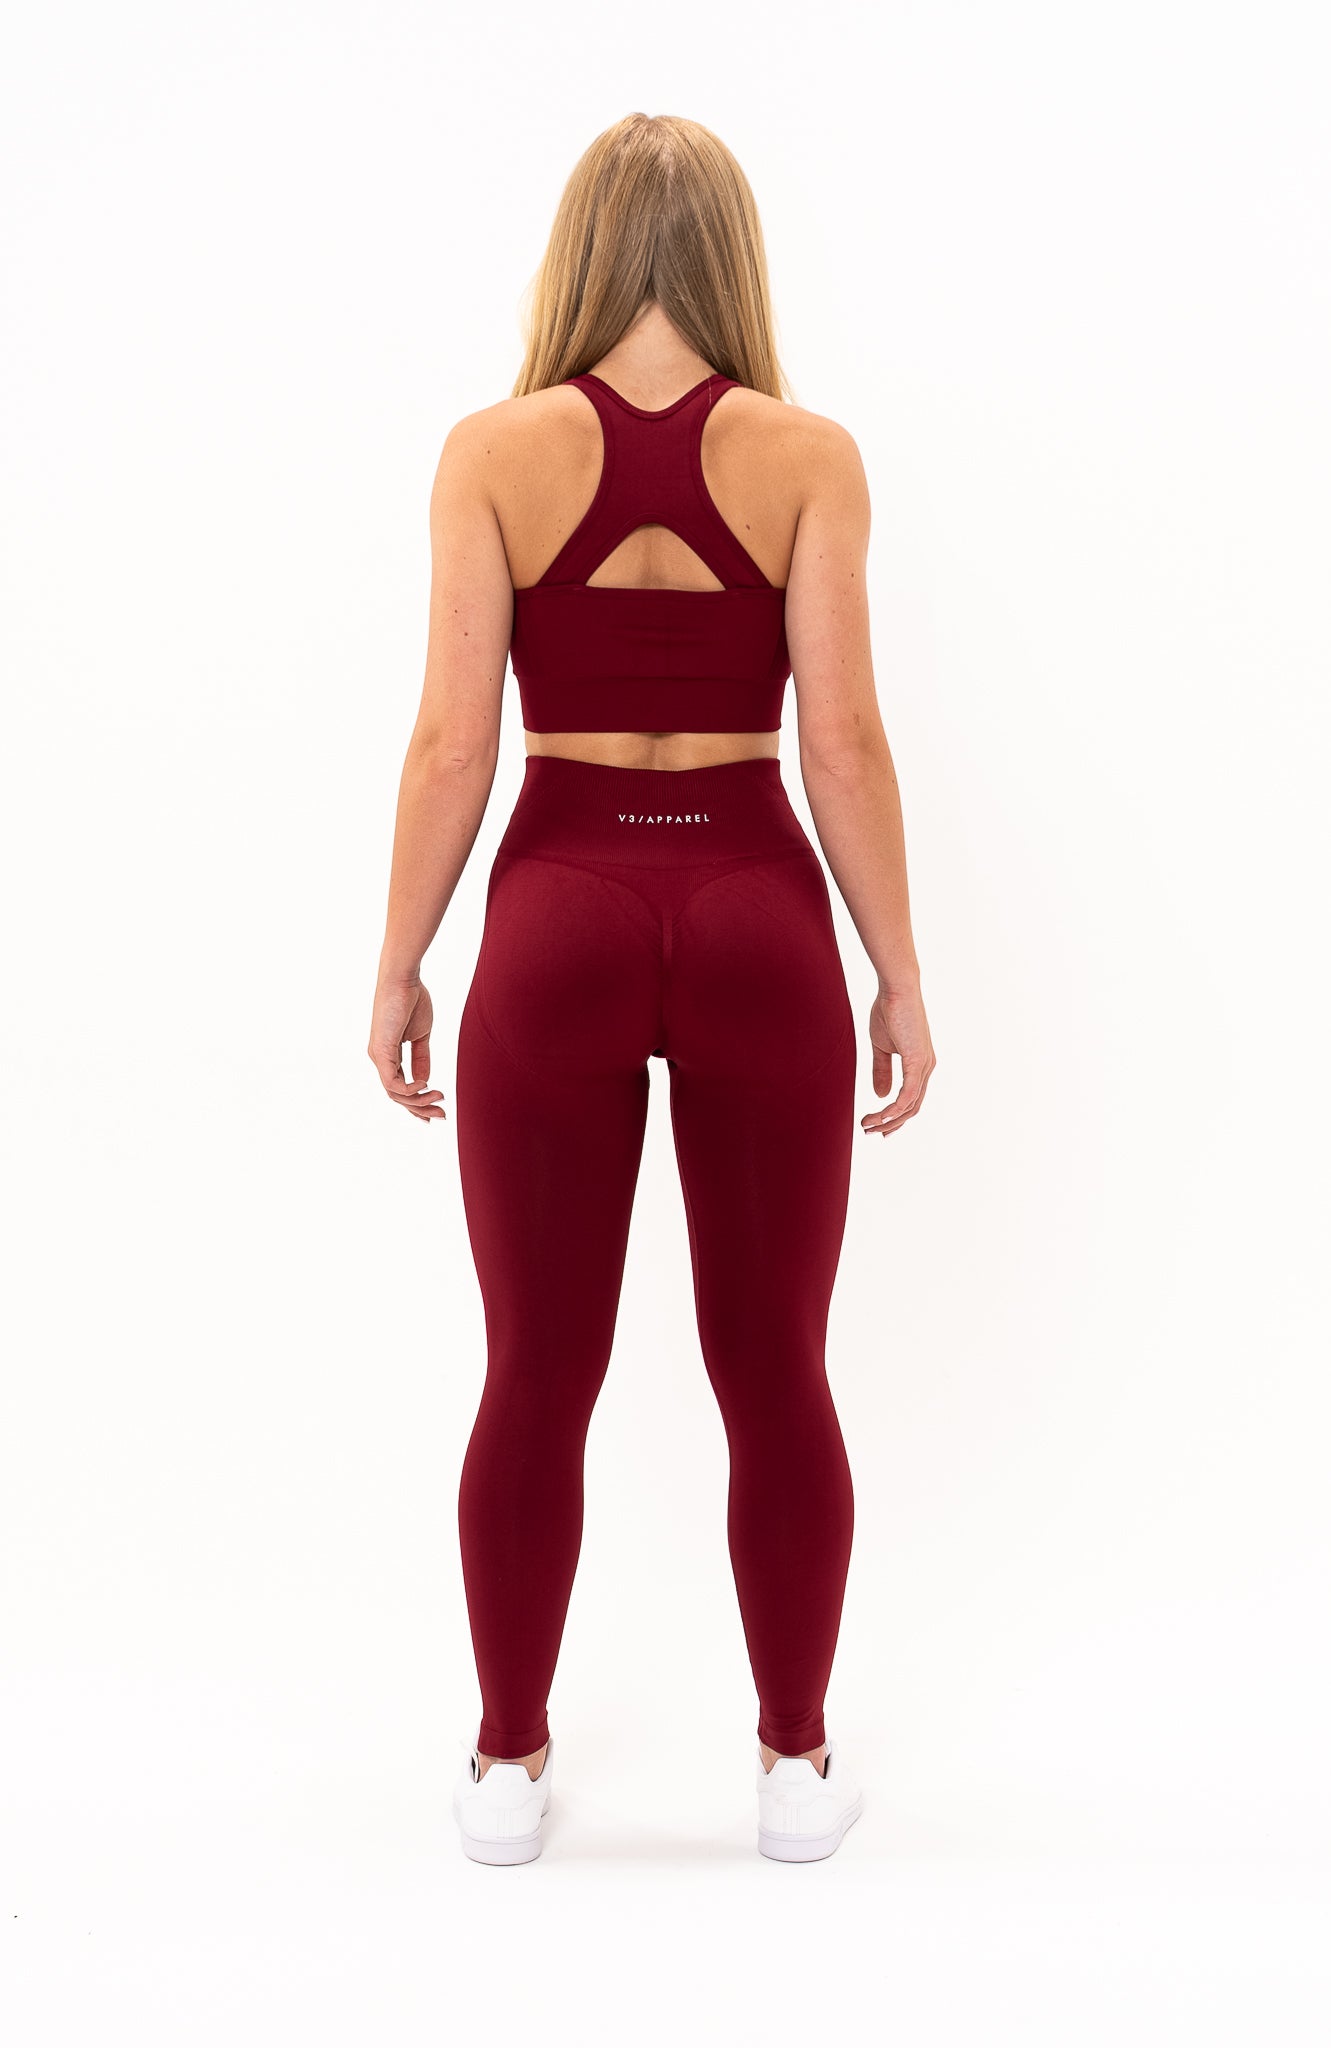 V3 Apparel Women's Tempo seamless scrunch bum shaping high waisted leggings and training sports bra in burgundy red – Squat proof sports tights and training bra for Gym workouts training, Running, yoga, bodybuilding and bikini fitness.